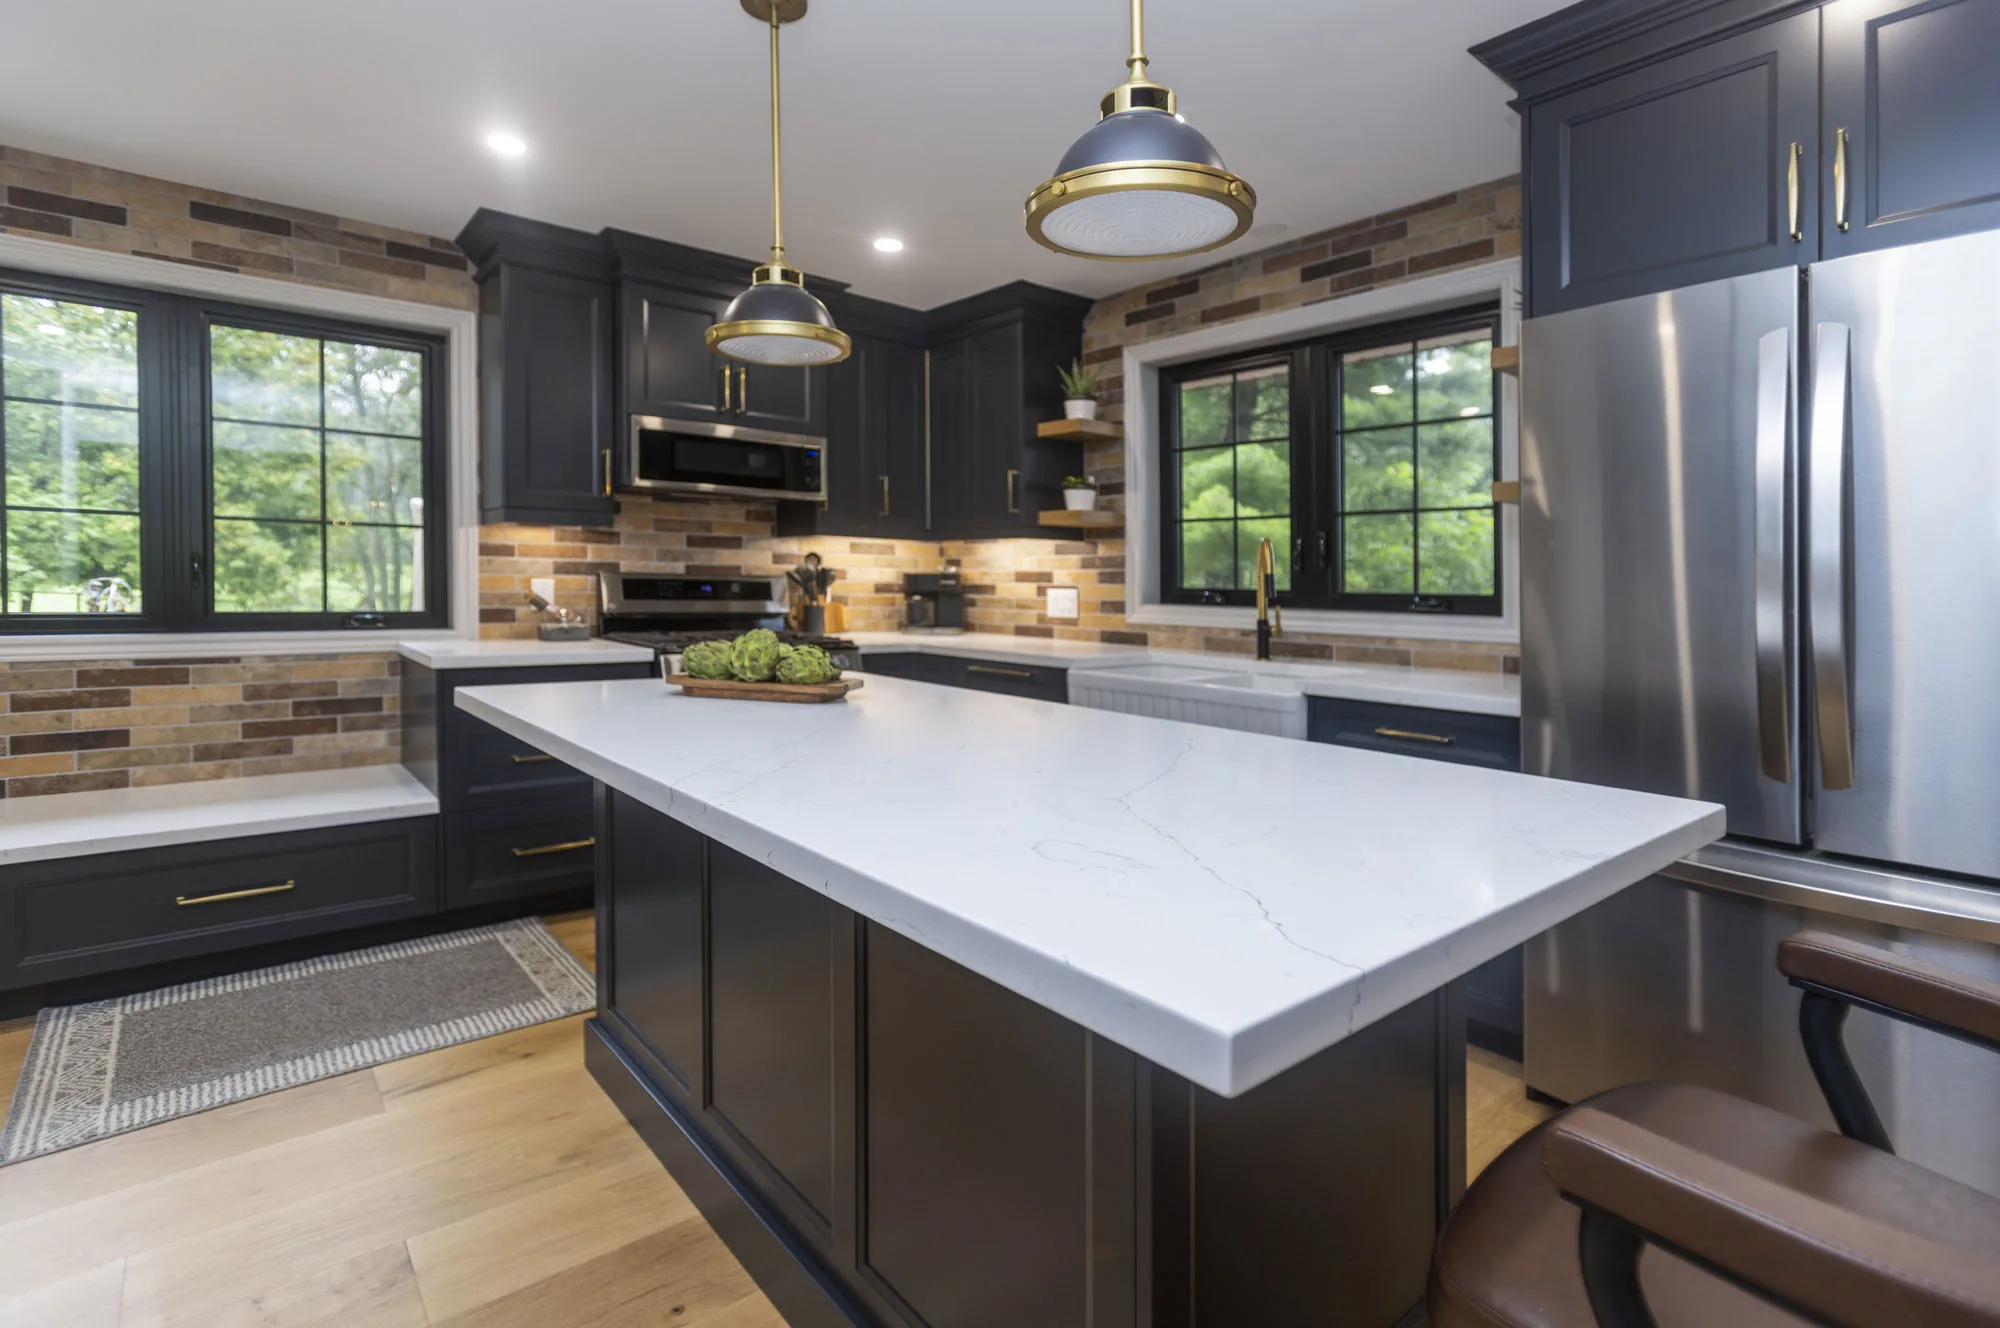 Kitchen with dark navy uppers and lowers with gold hardware and stainless steel appliances along with an island with vintage overhead lights